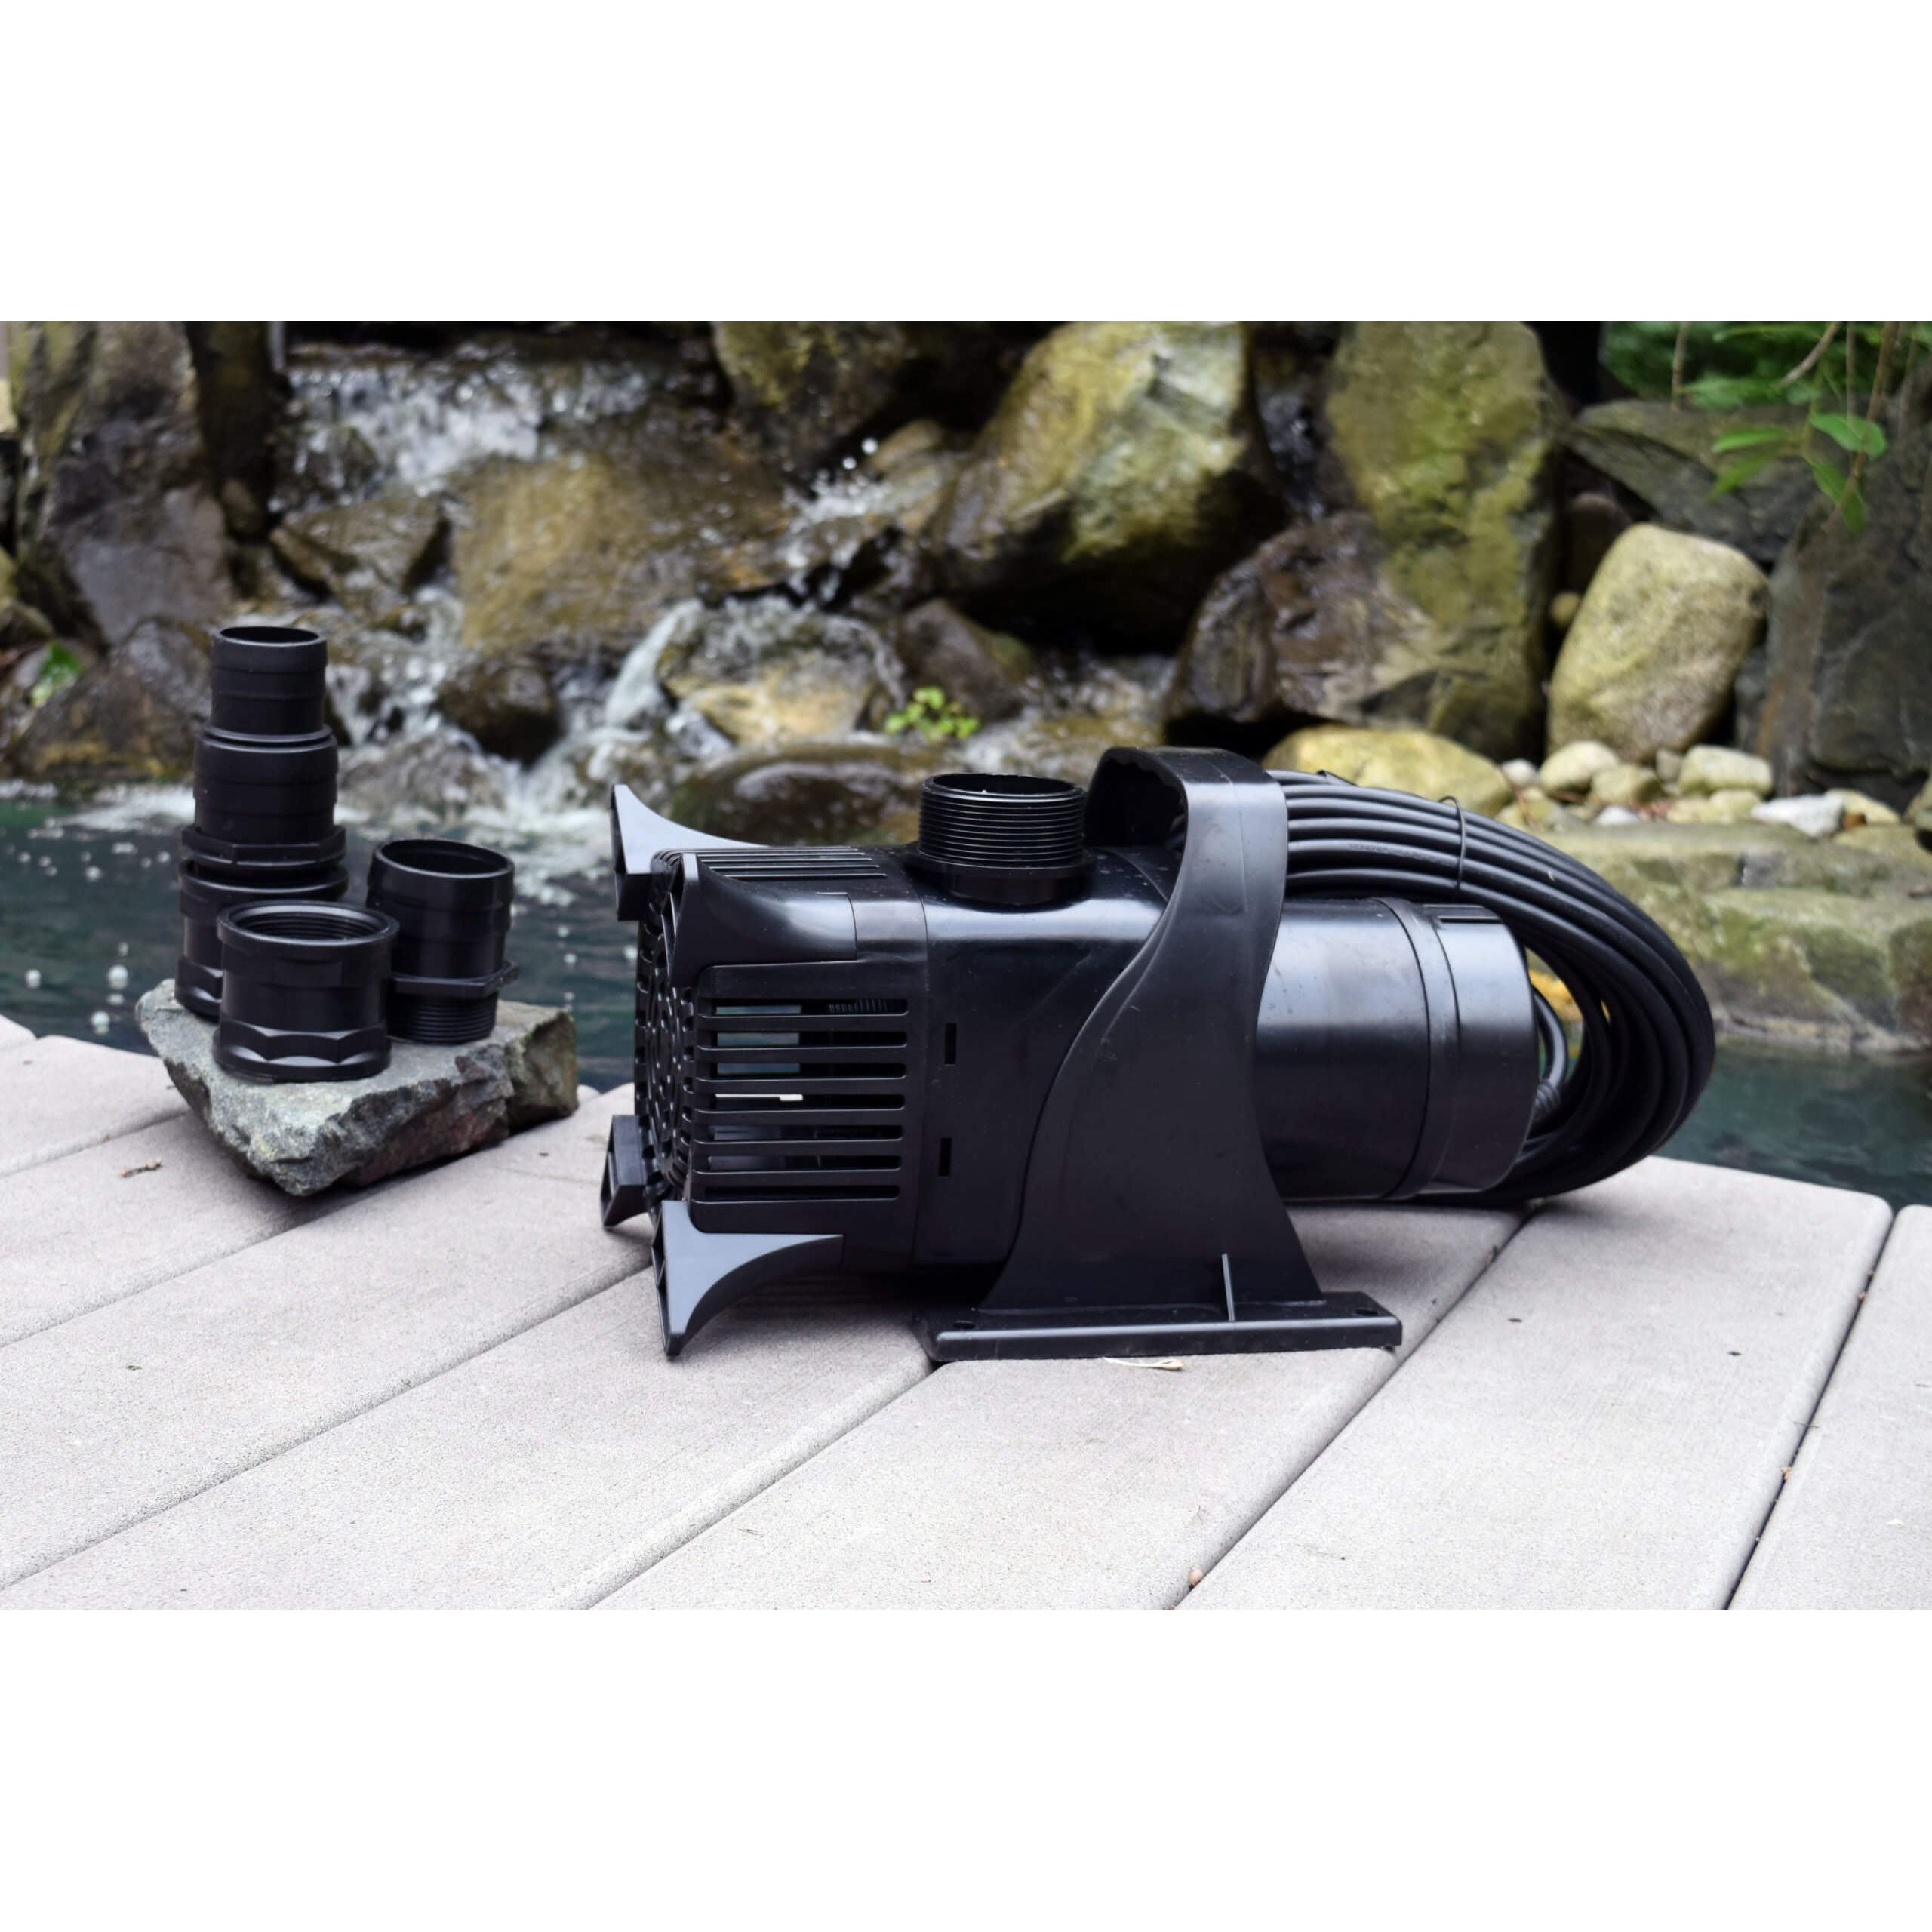 Easy Pro EPA Series Asynchronous Submersible Mag Drive Pumps - American Pond Supplies Easy Pro 2510 gph Mag Drive Pumps Mag Drive Pumps